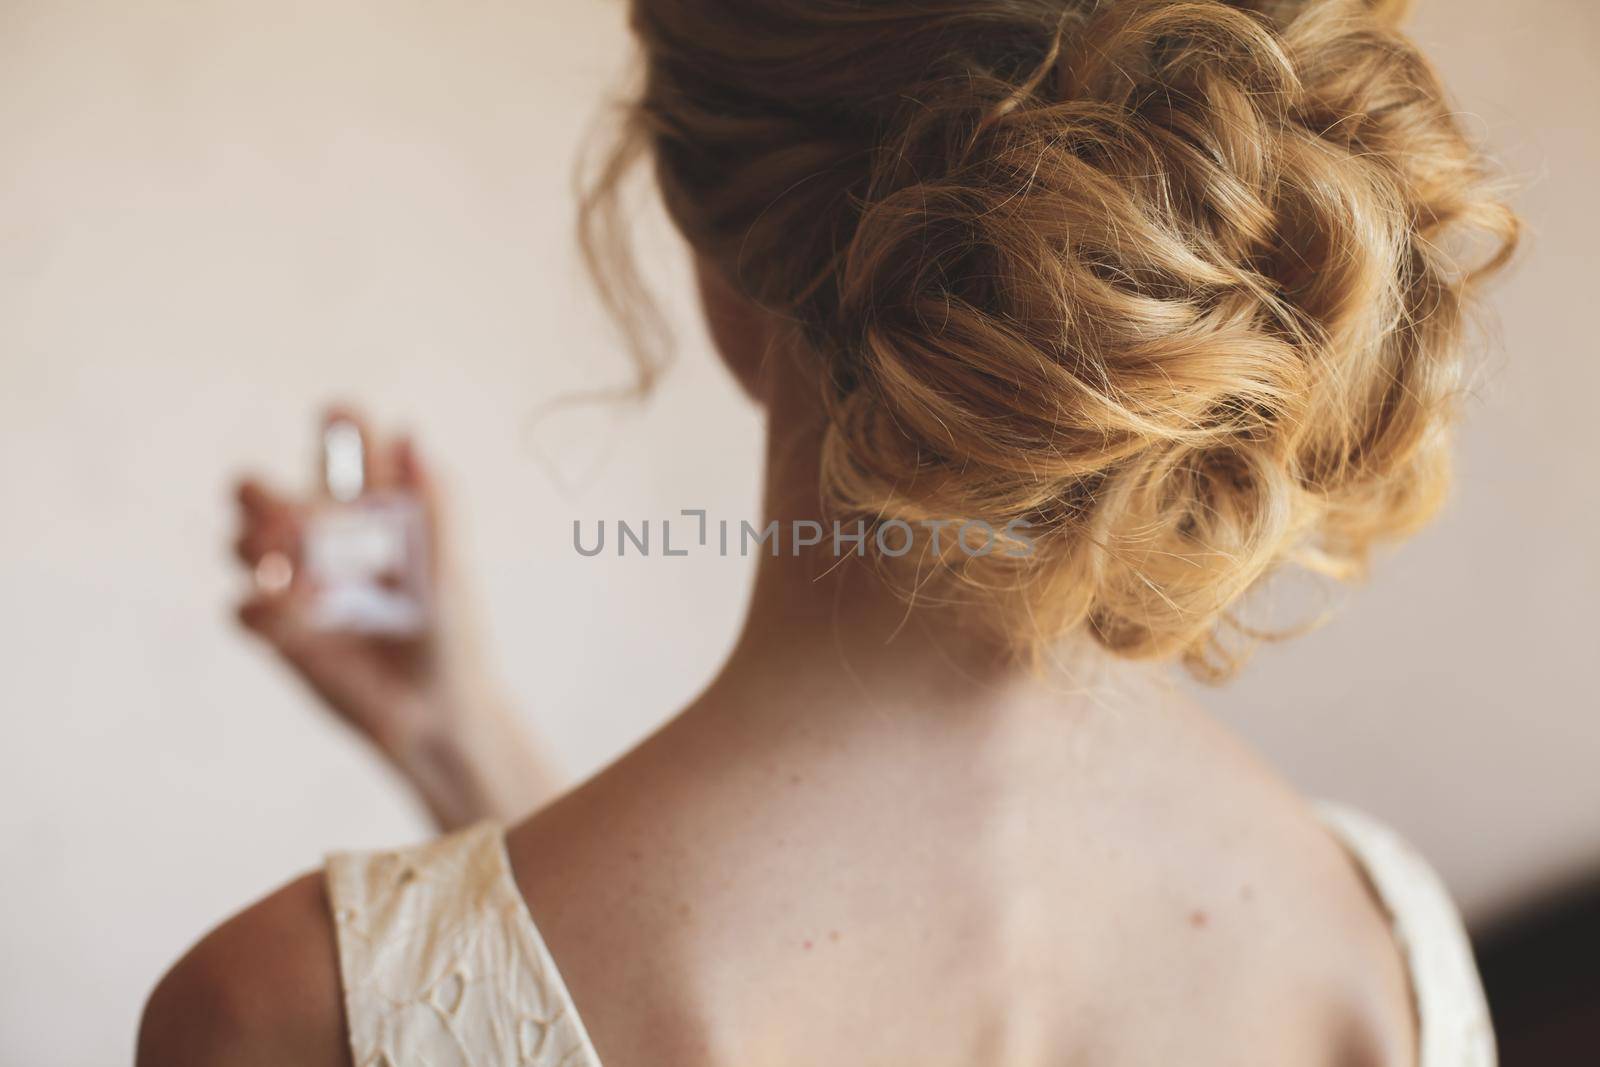 The blonde bride enjoys perfume during the wedding preparations by StudioPeace